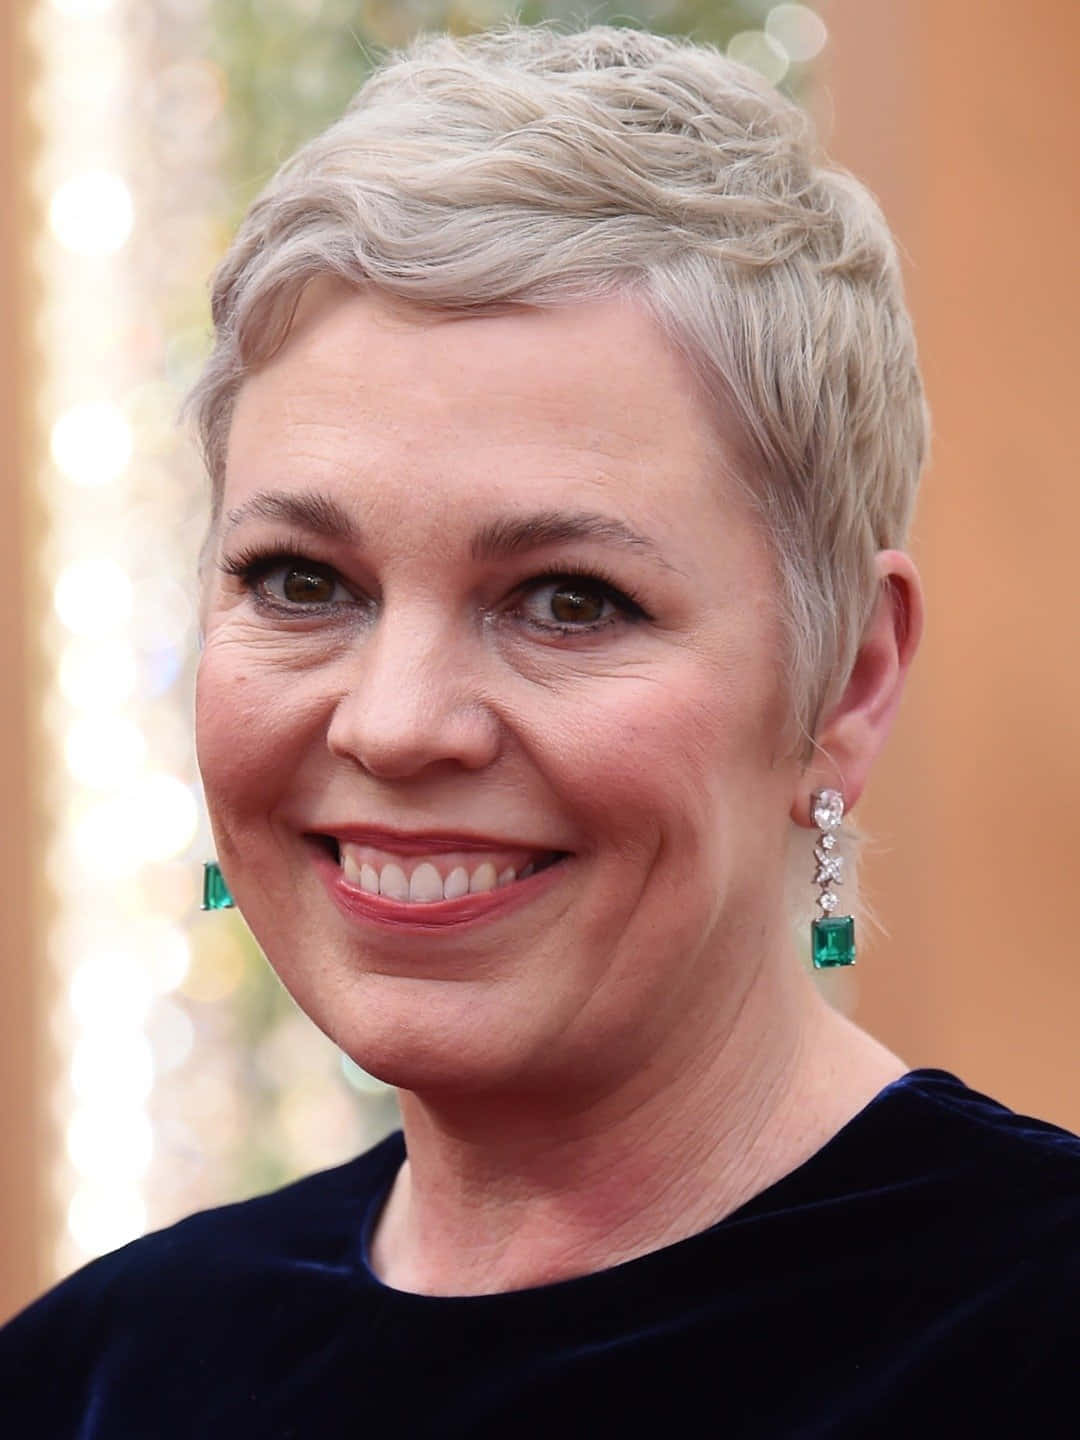 Olivia Colman Glowing On The Red Carpet. Wallpaper